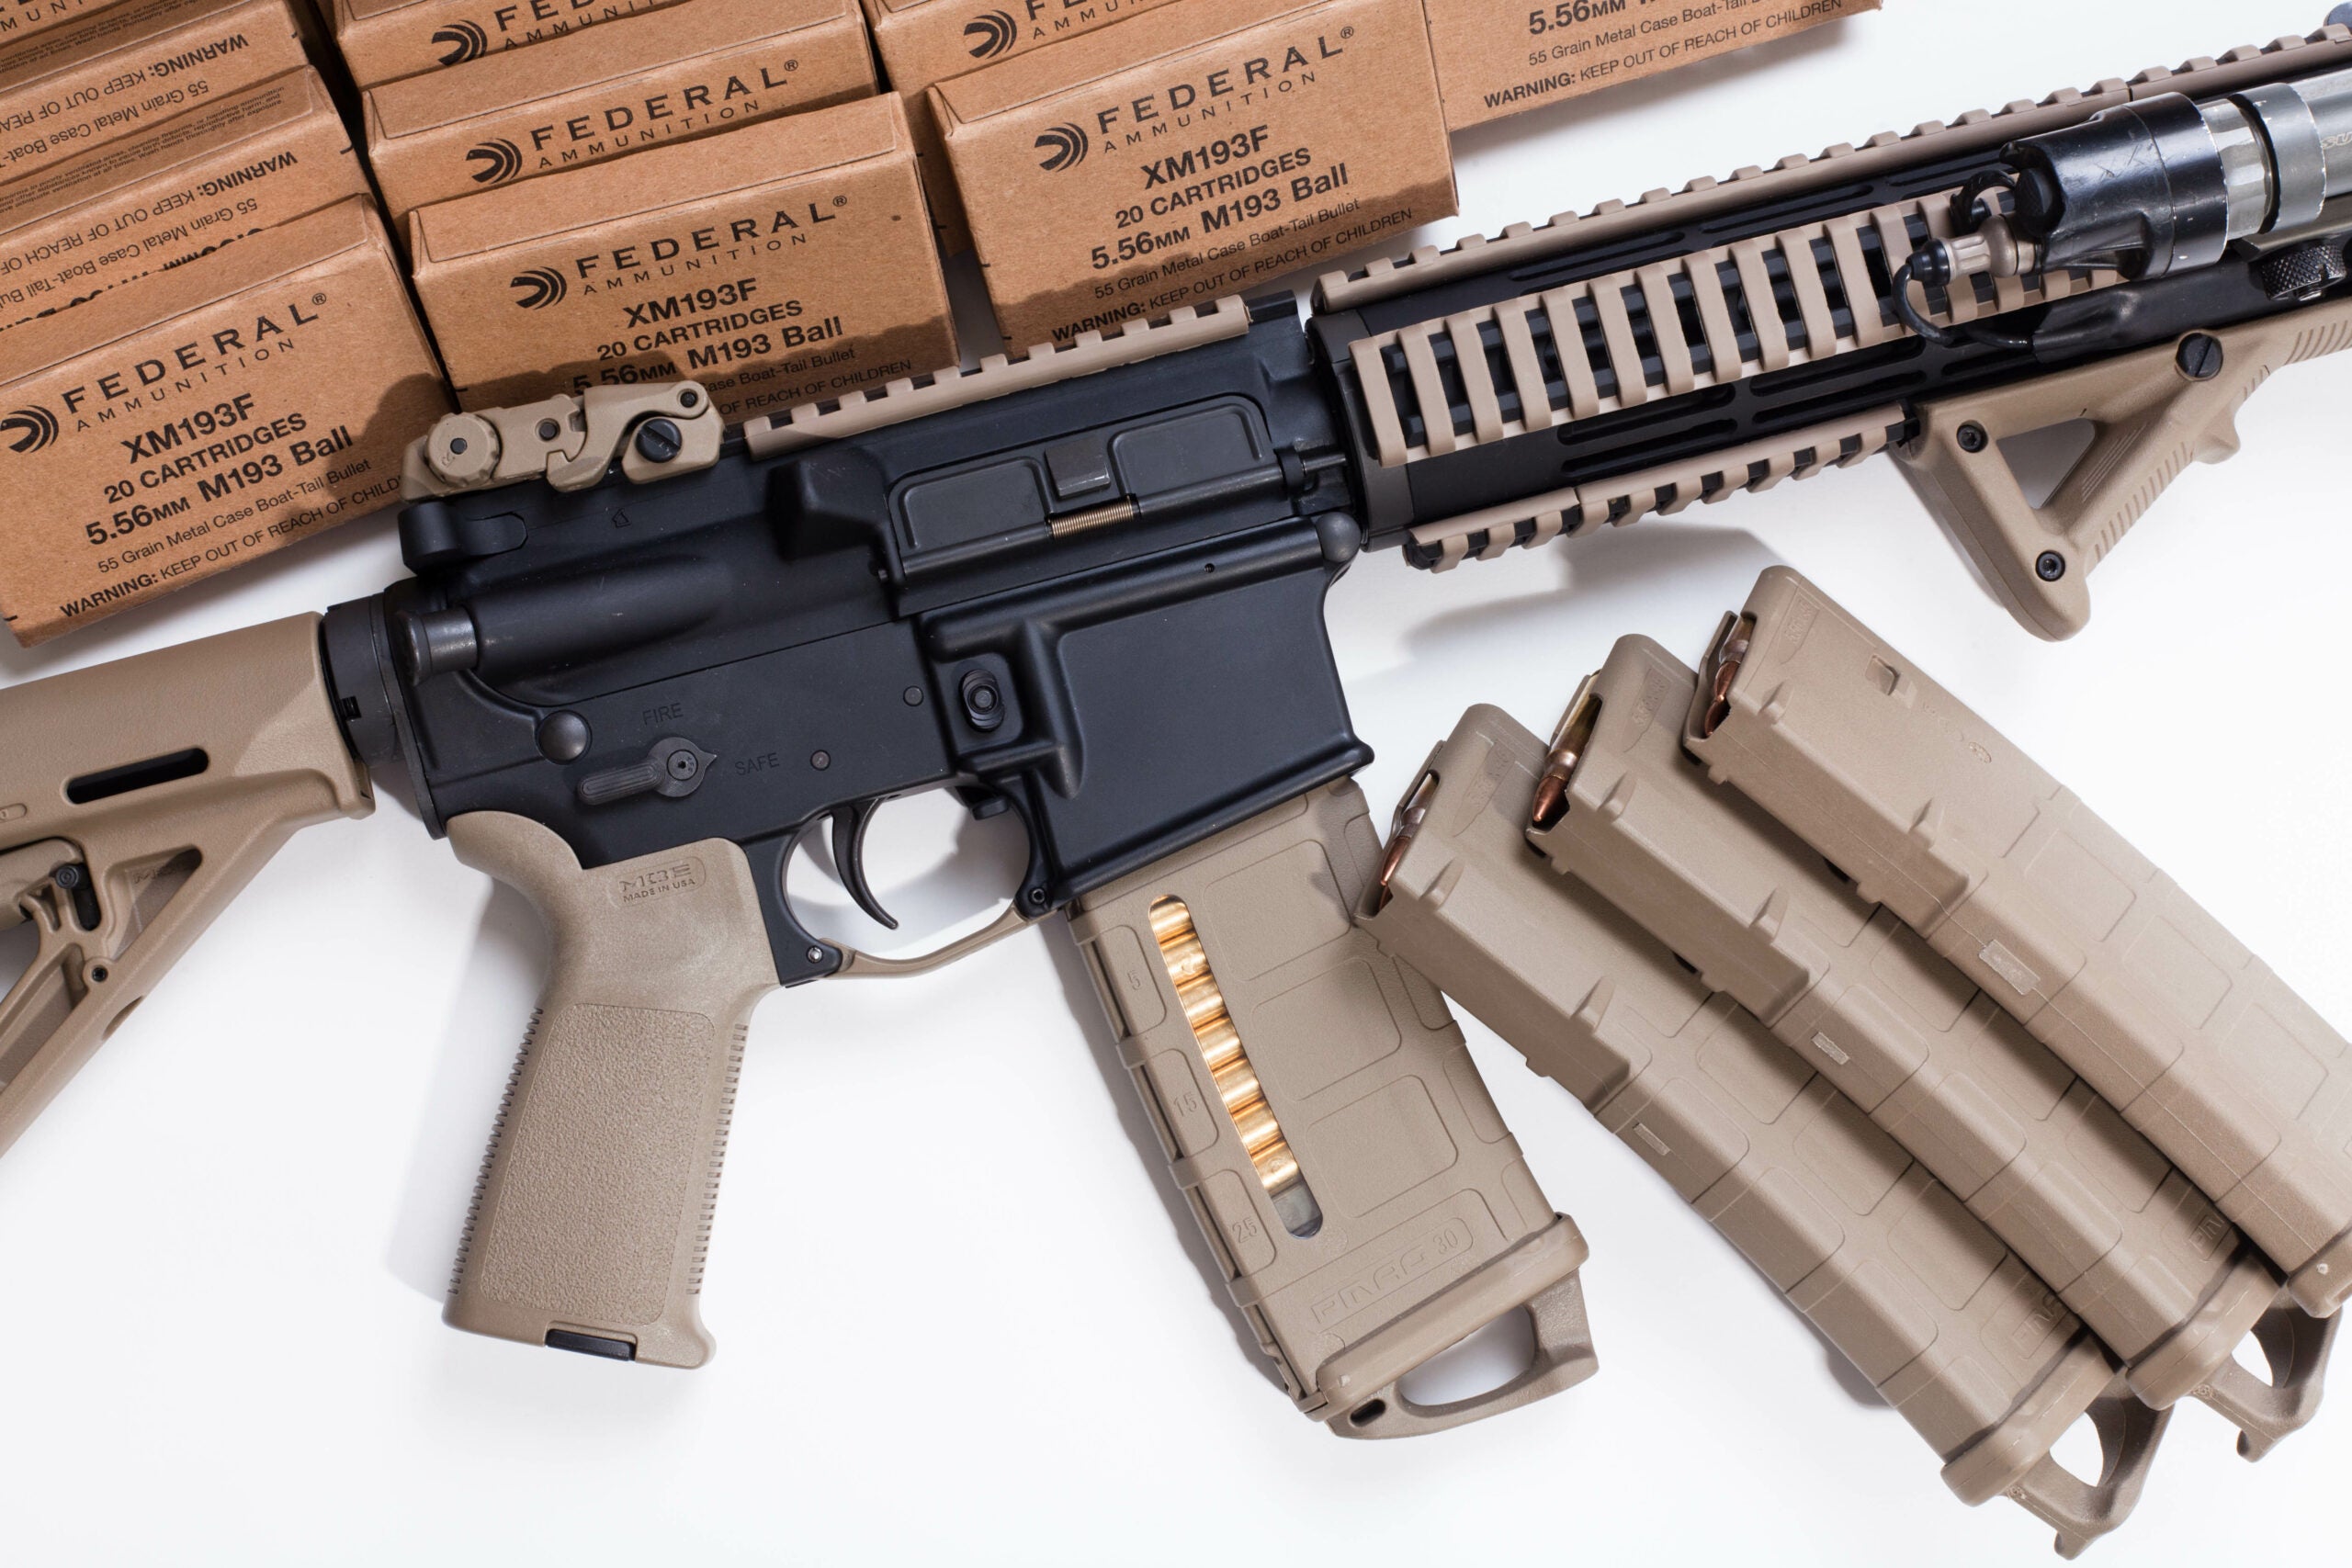 10 must-have accessories for your AR-15 rifle - Task & Purpose